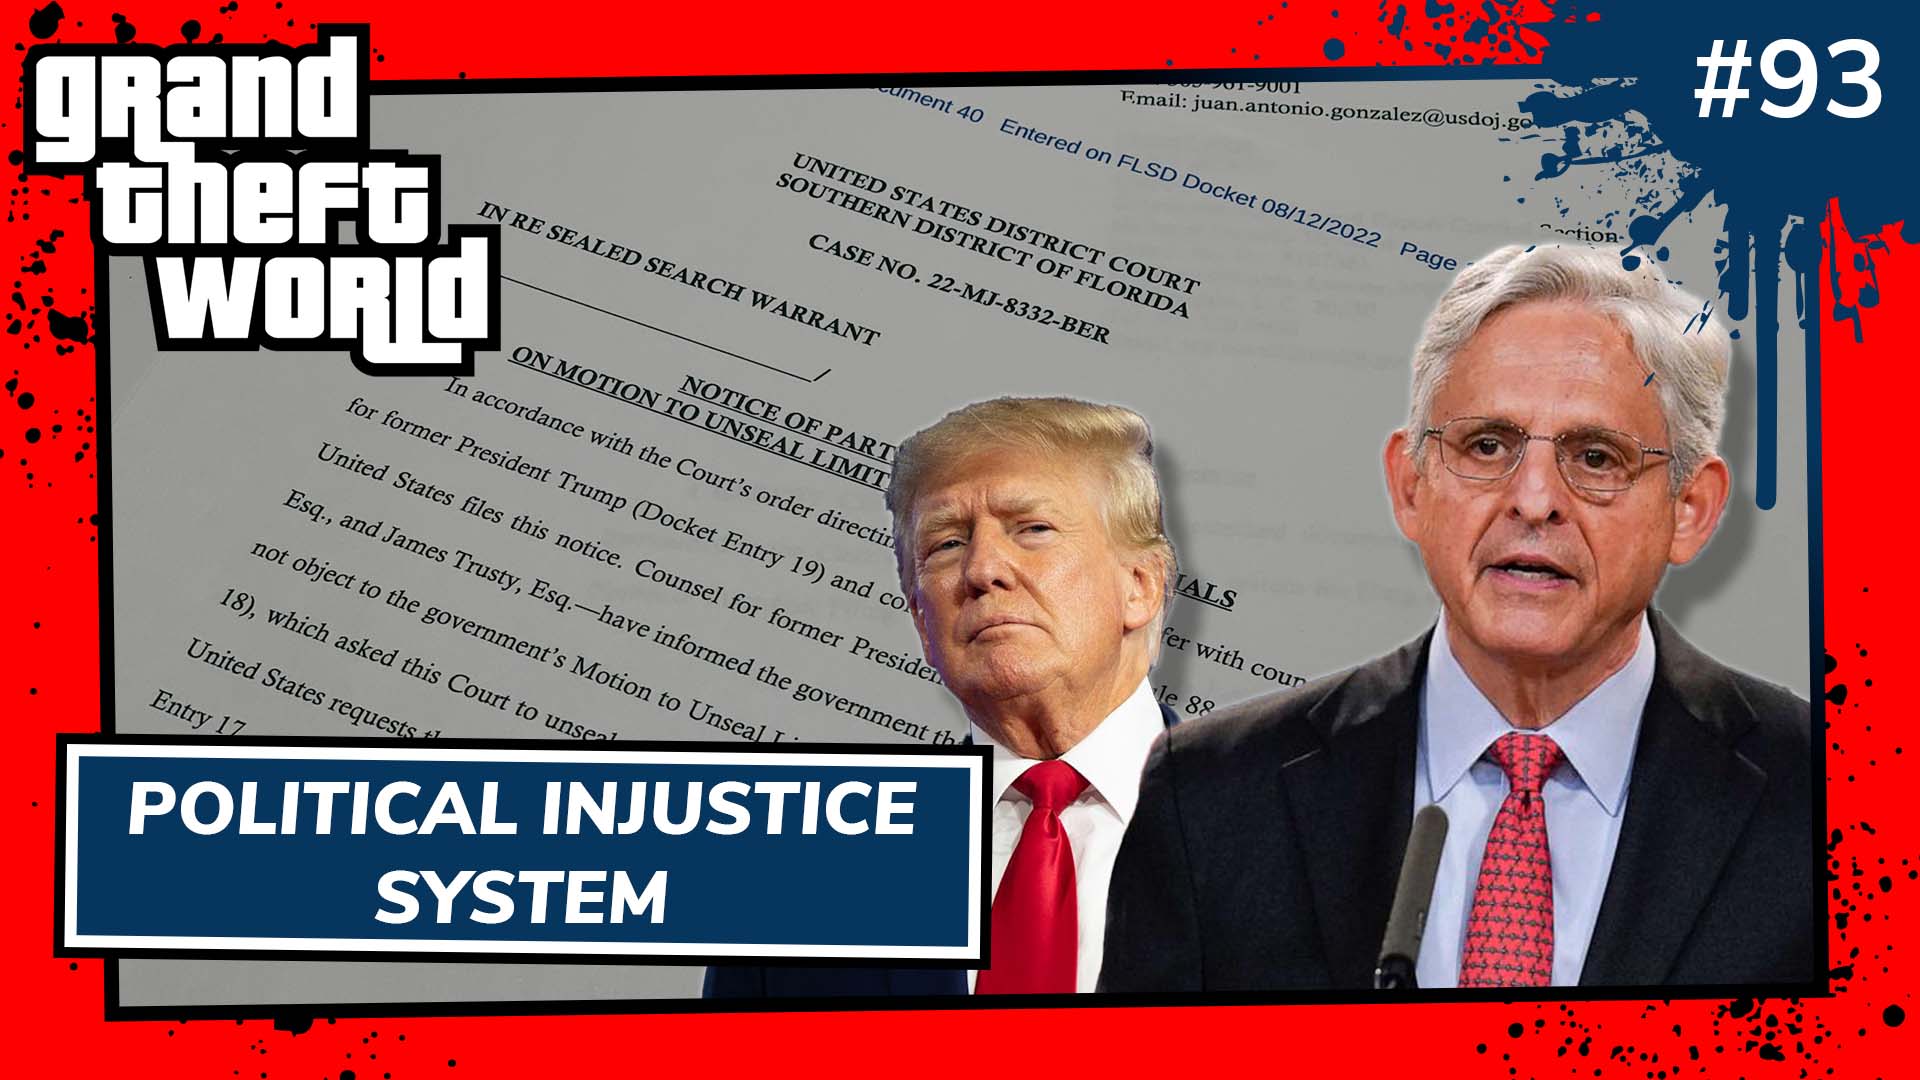 Grand Theft World Podcast 093 | Political Injustice System